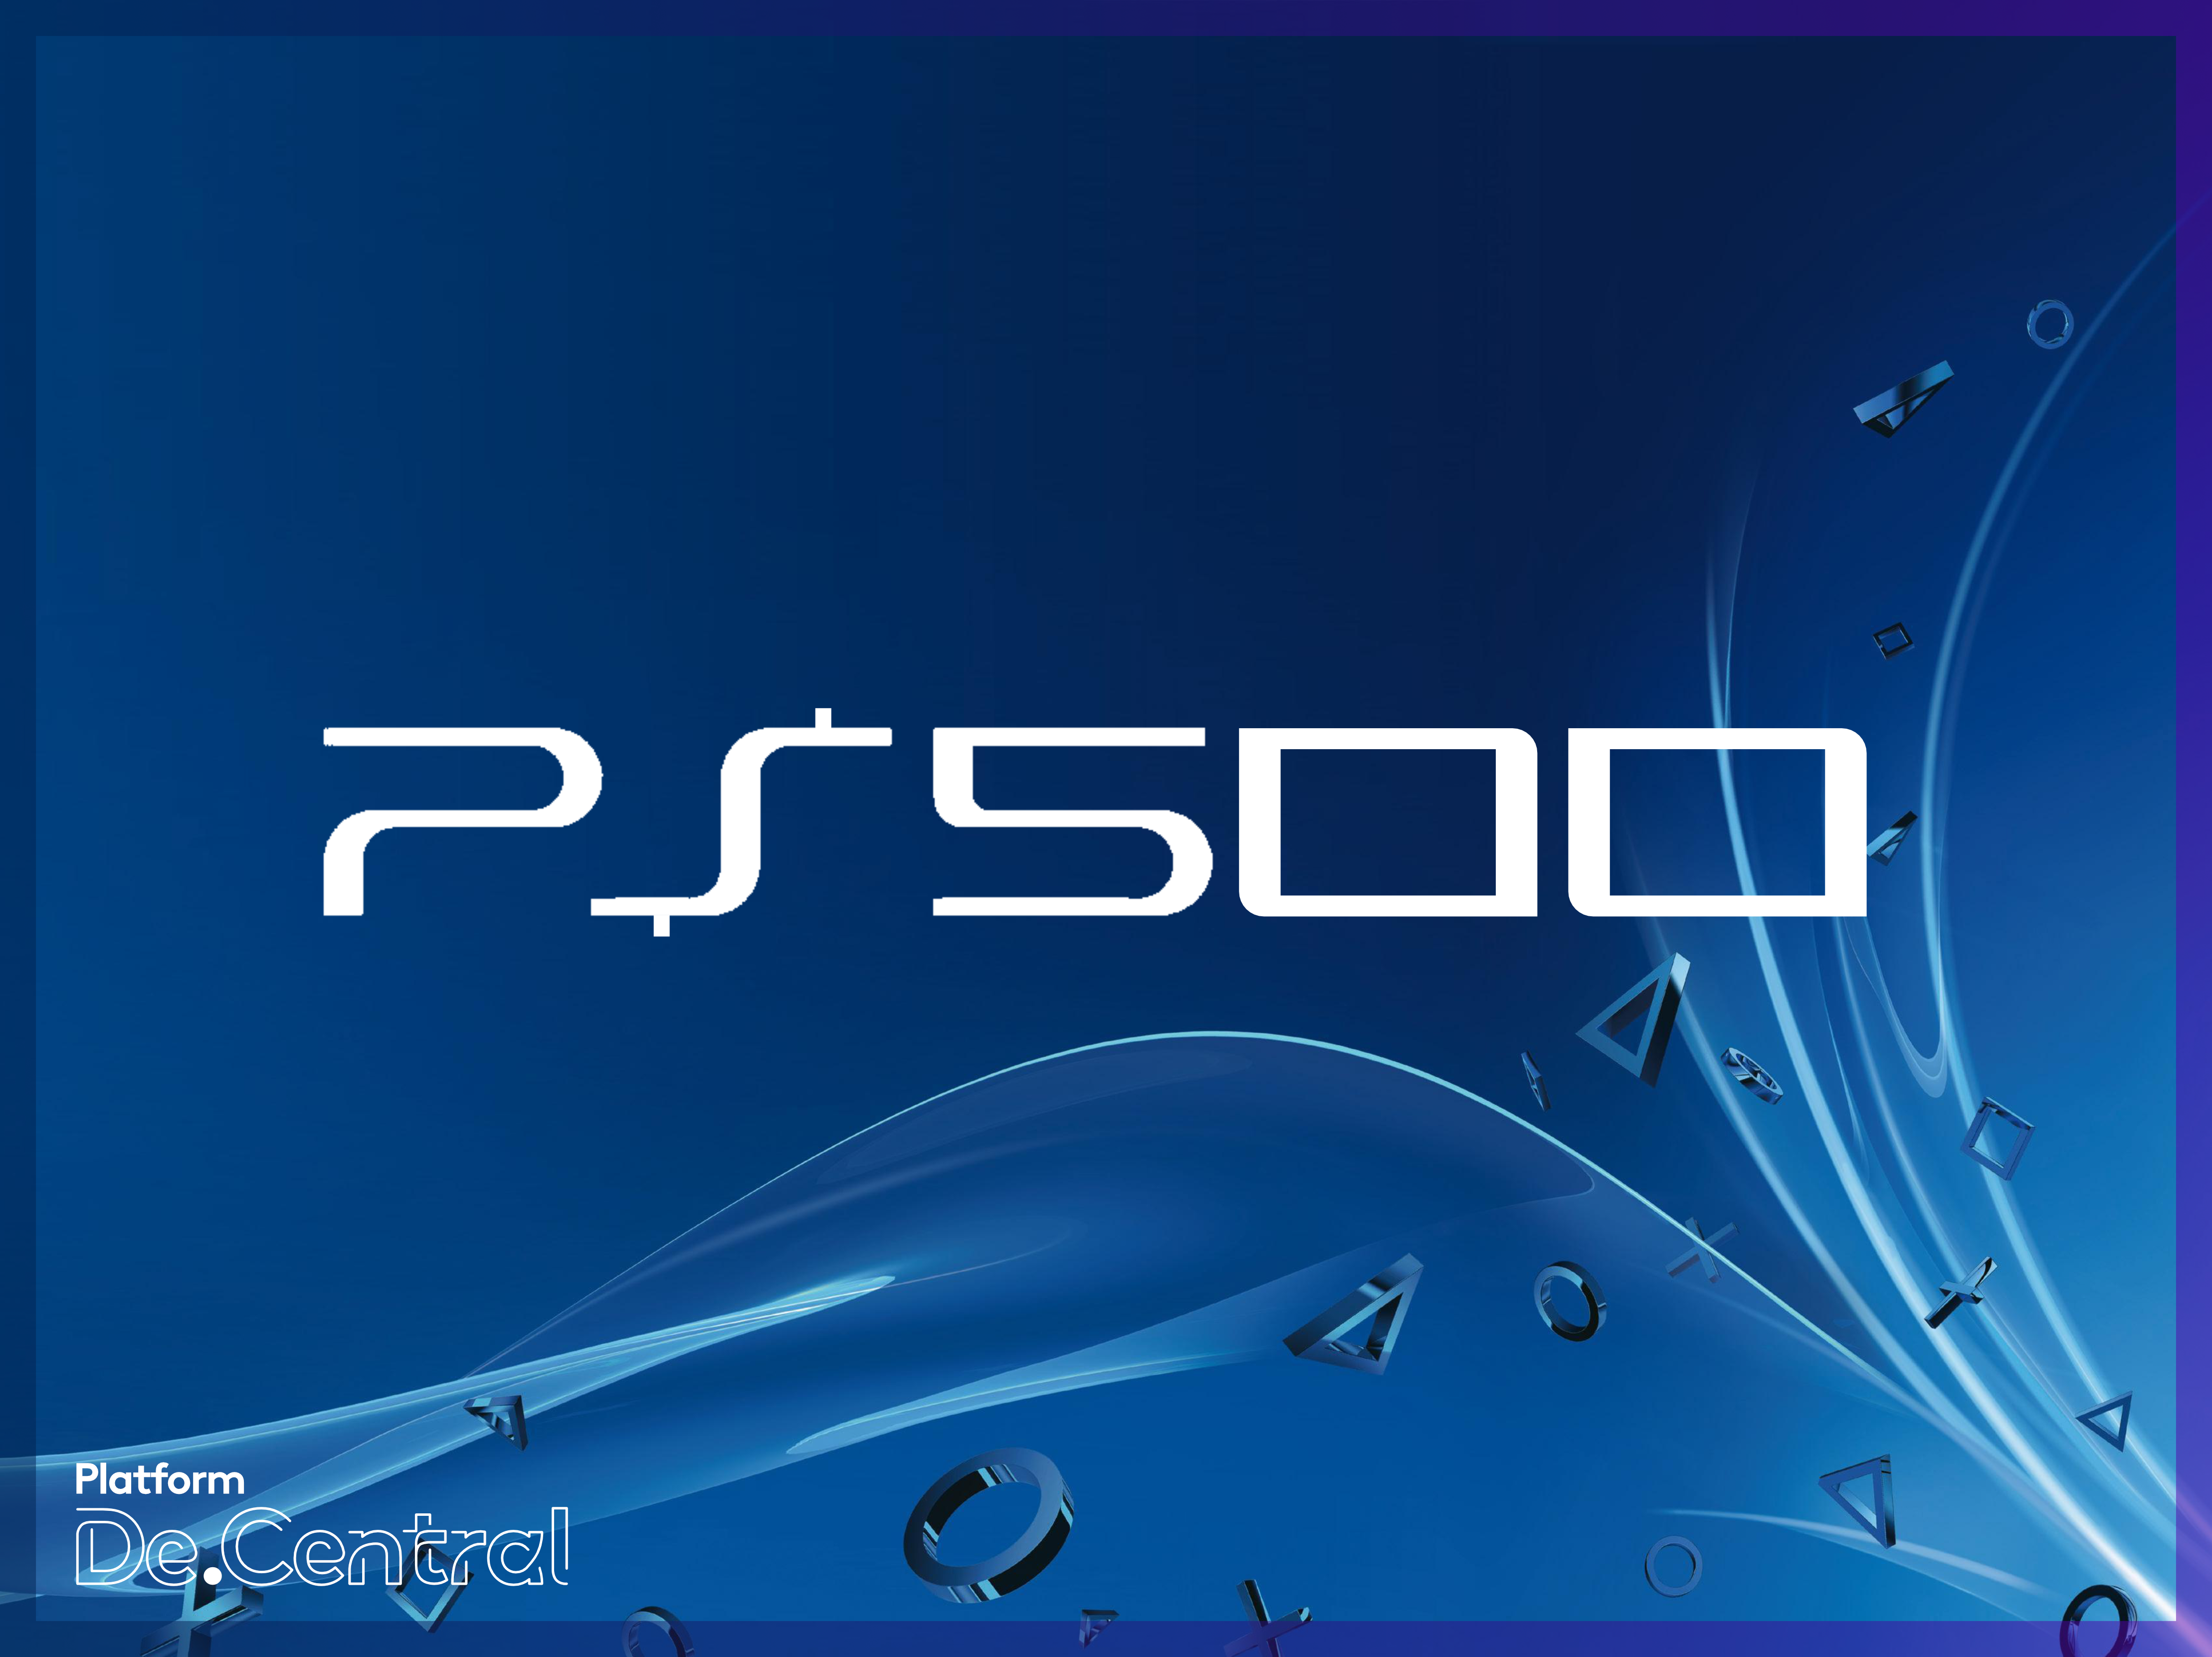 Will the PS5 cost $500?